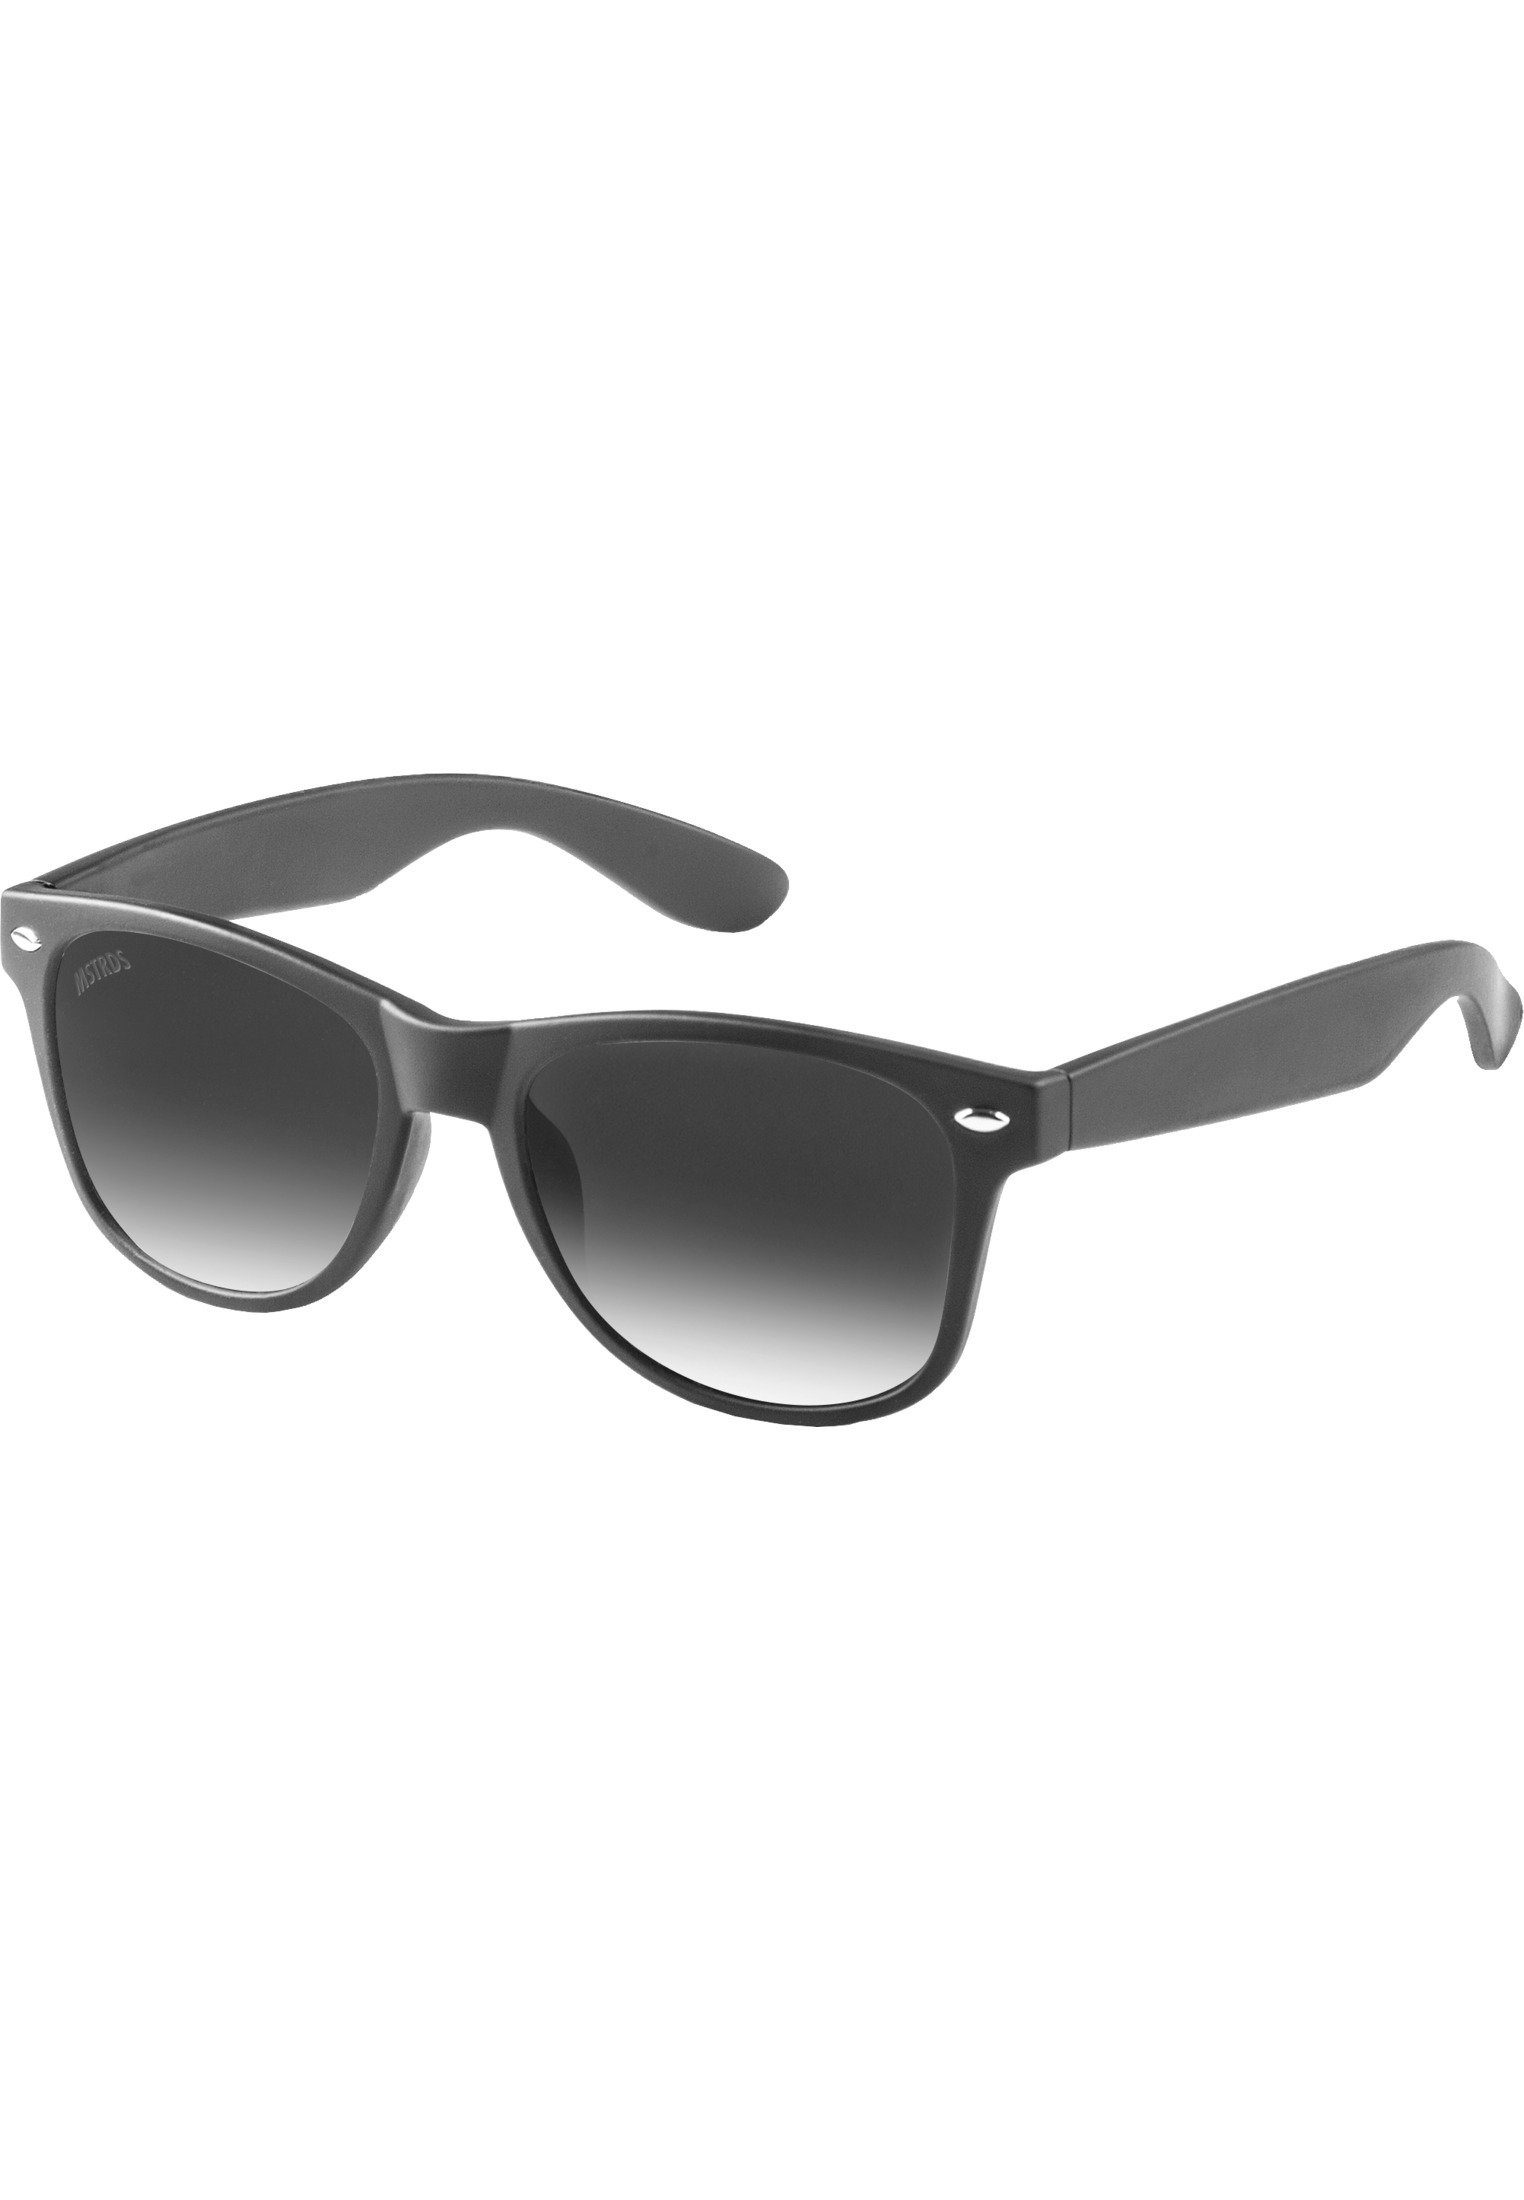 MSTRDS Sonnenbrille Accessoires Likoma Youth blk/gry Sunglasses